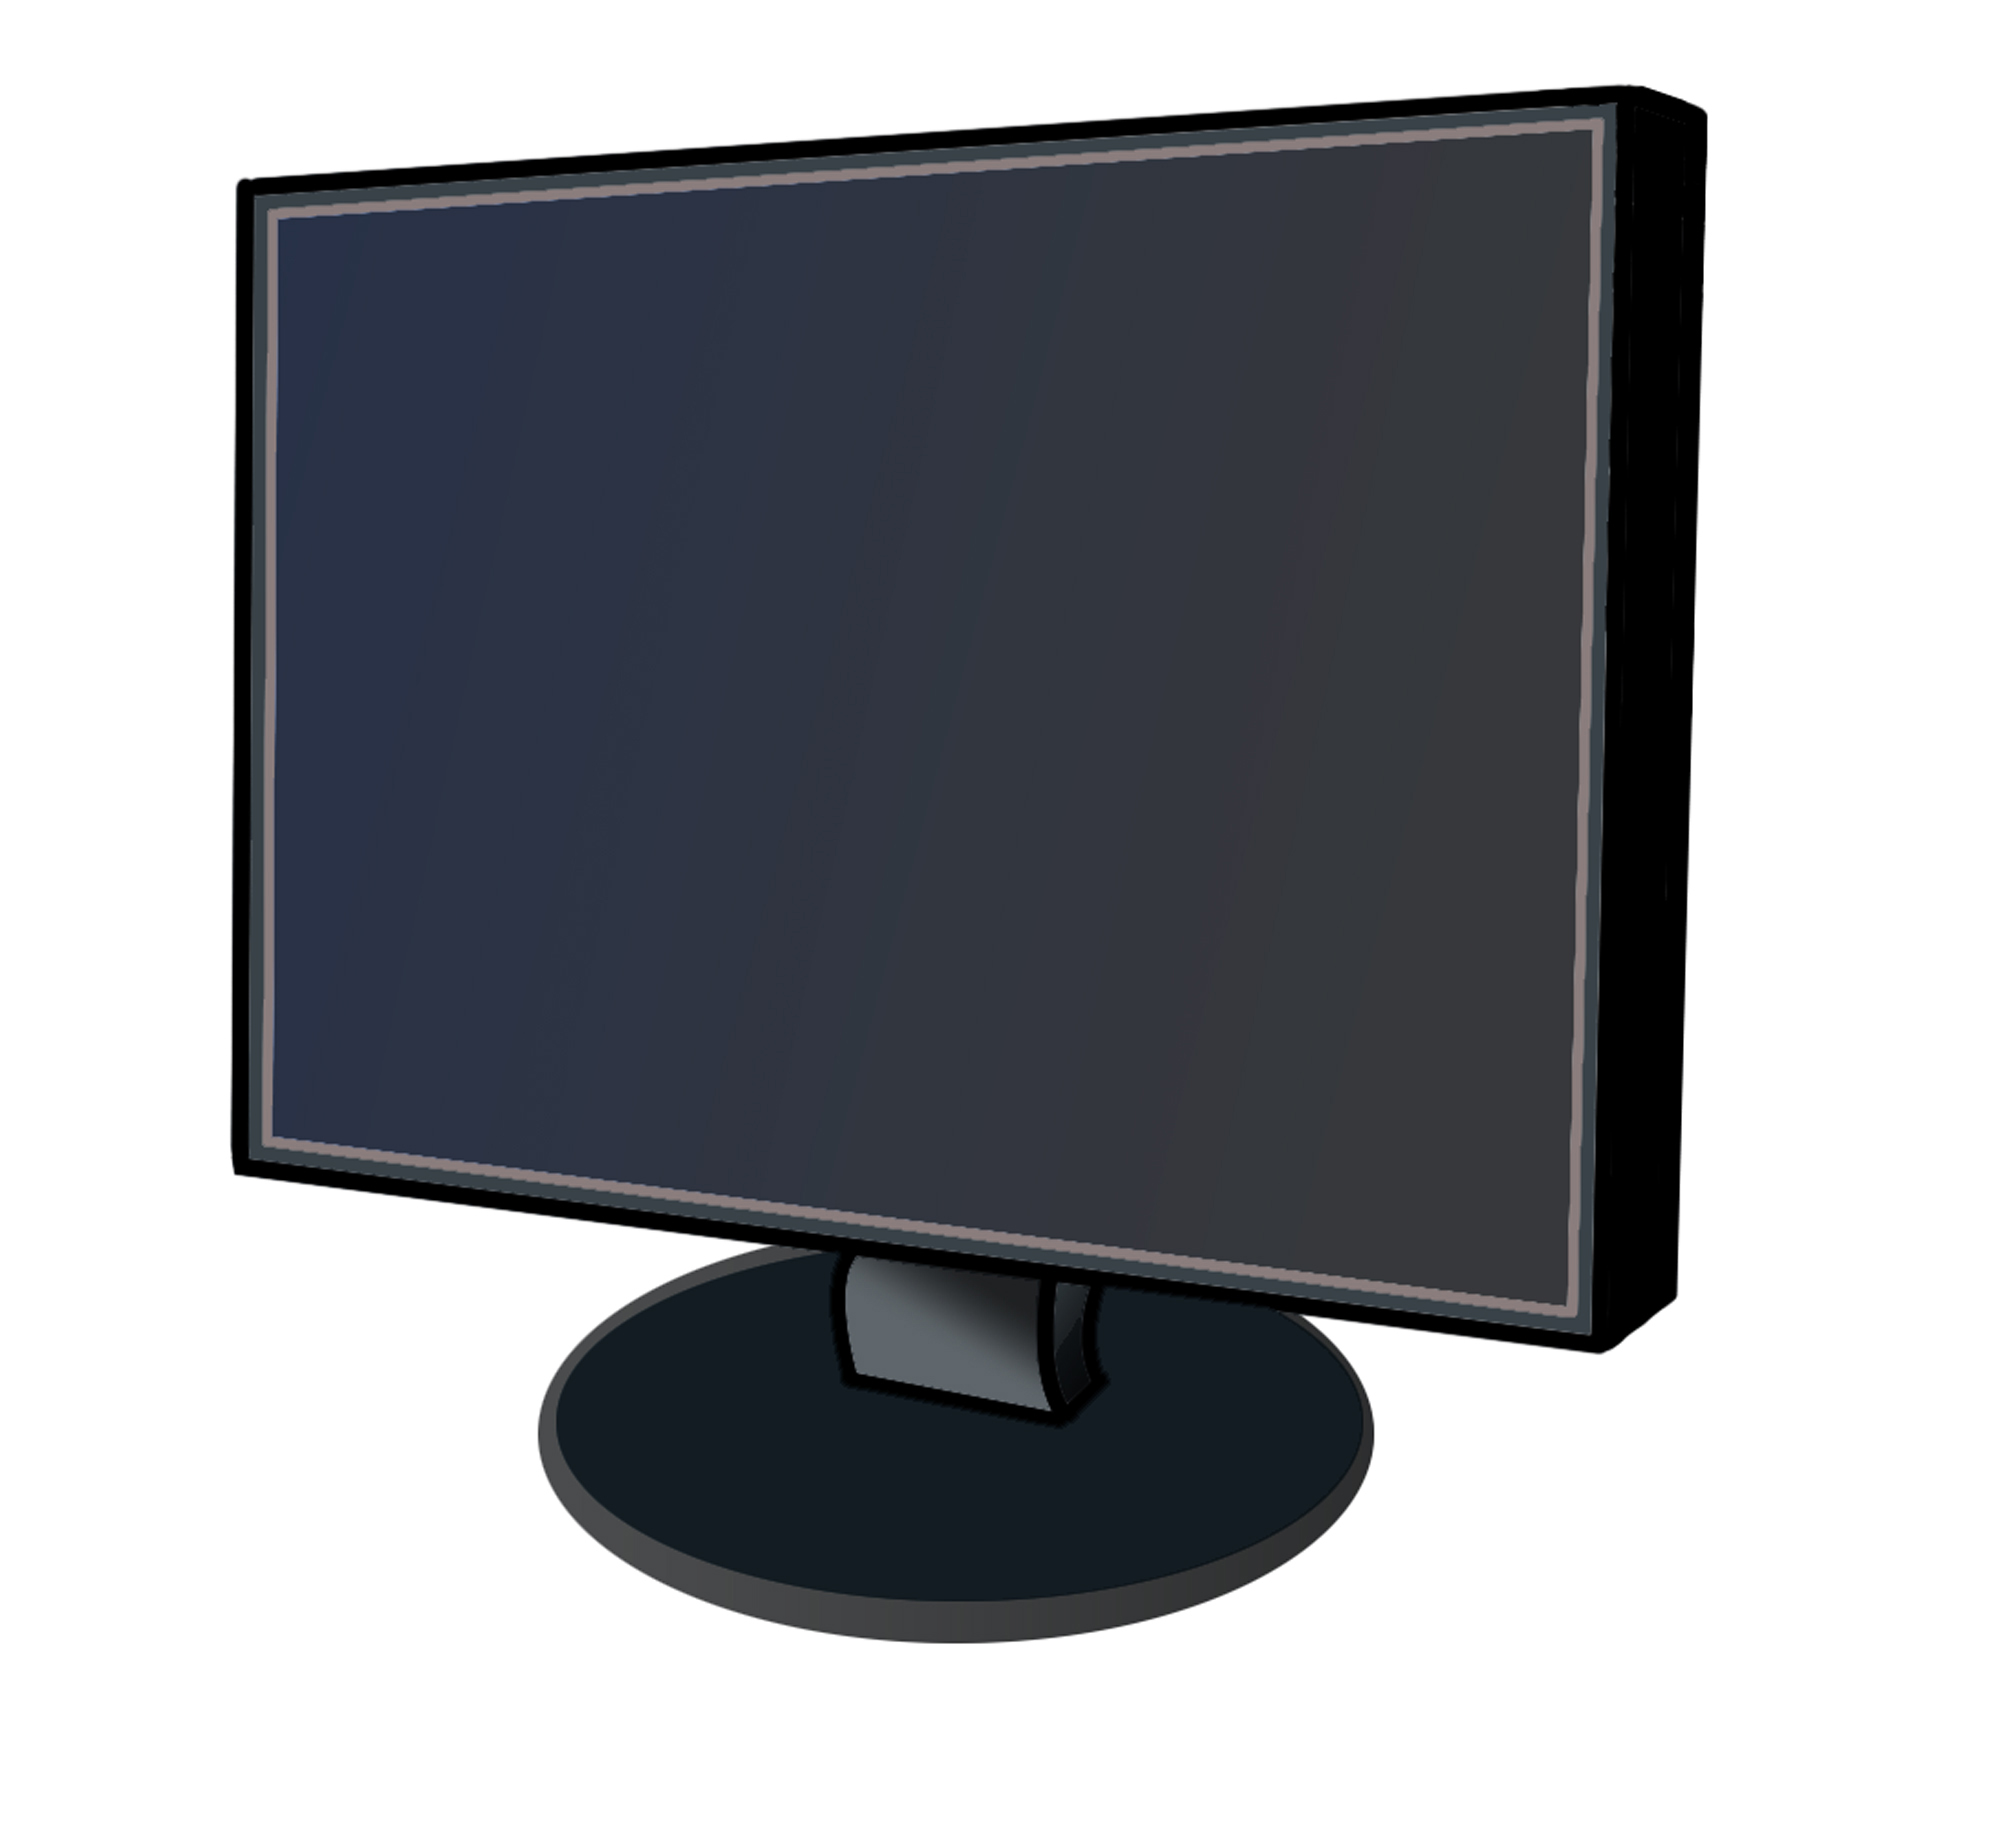 Computer Monitor Screen Clip Art Images  Pictures - Becuo